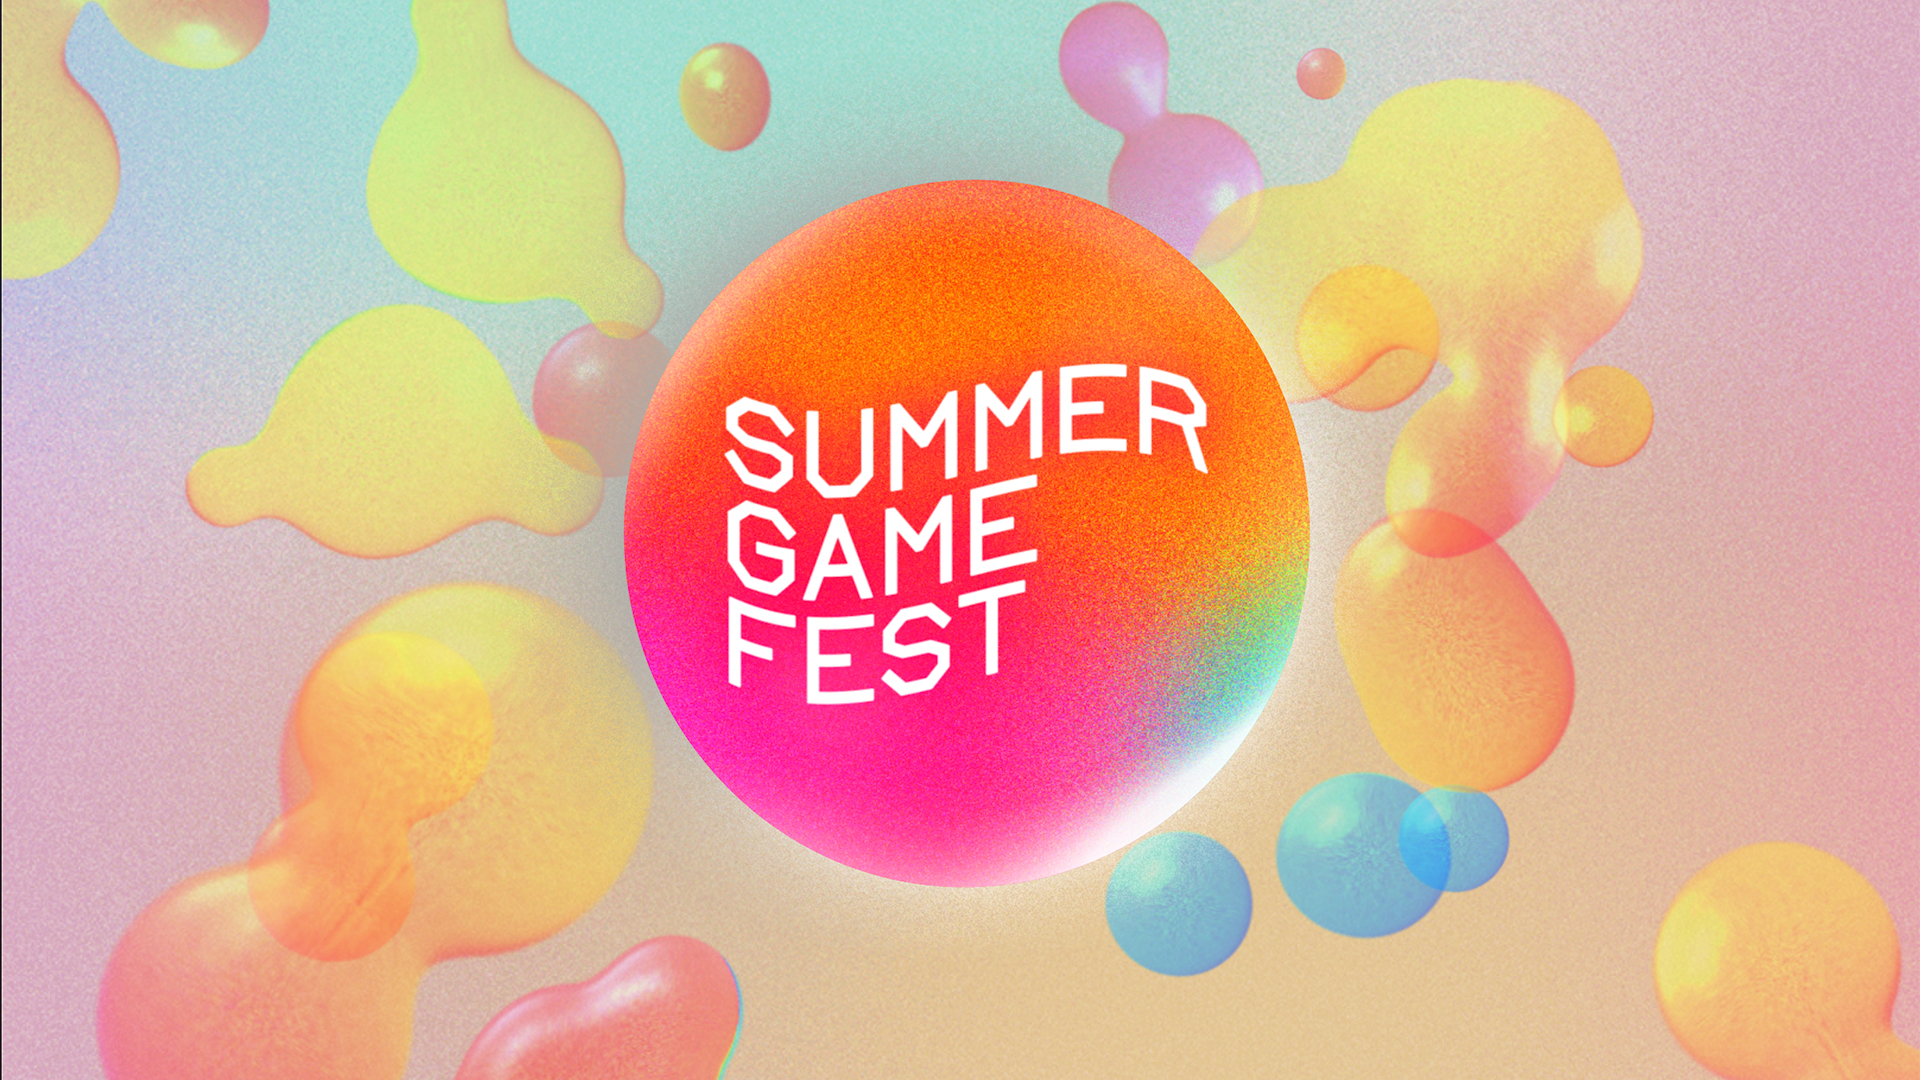 The Summer Game Fest logo floats over a gradient background in key art for SGF 2024.